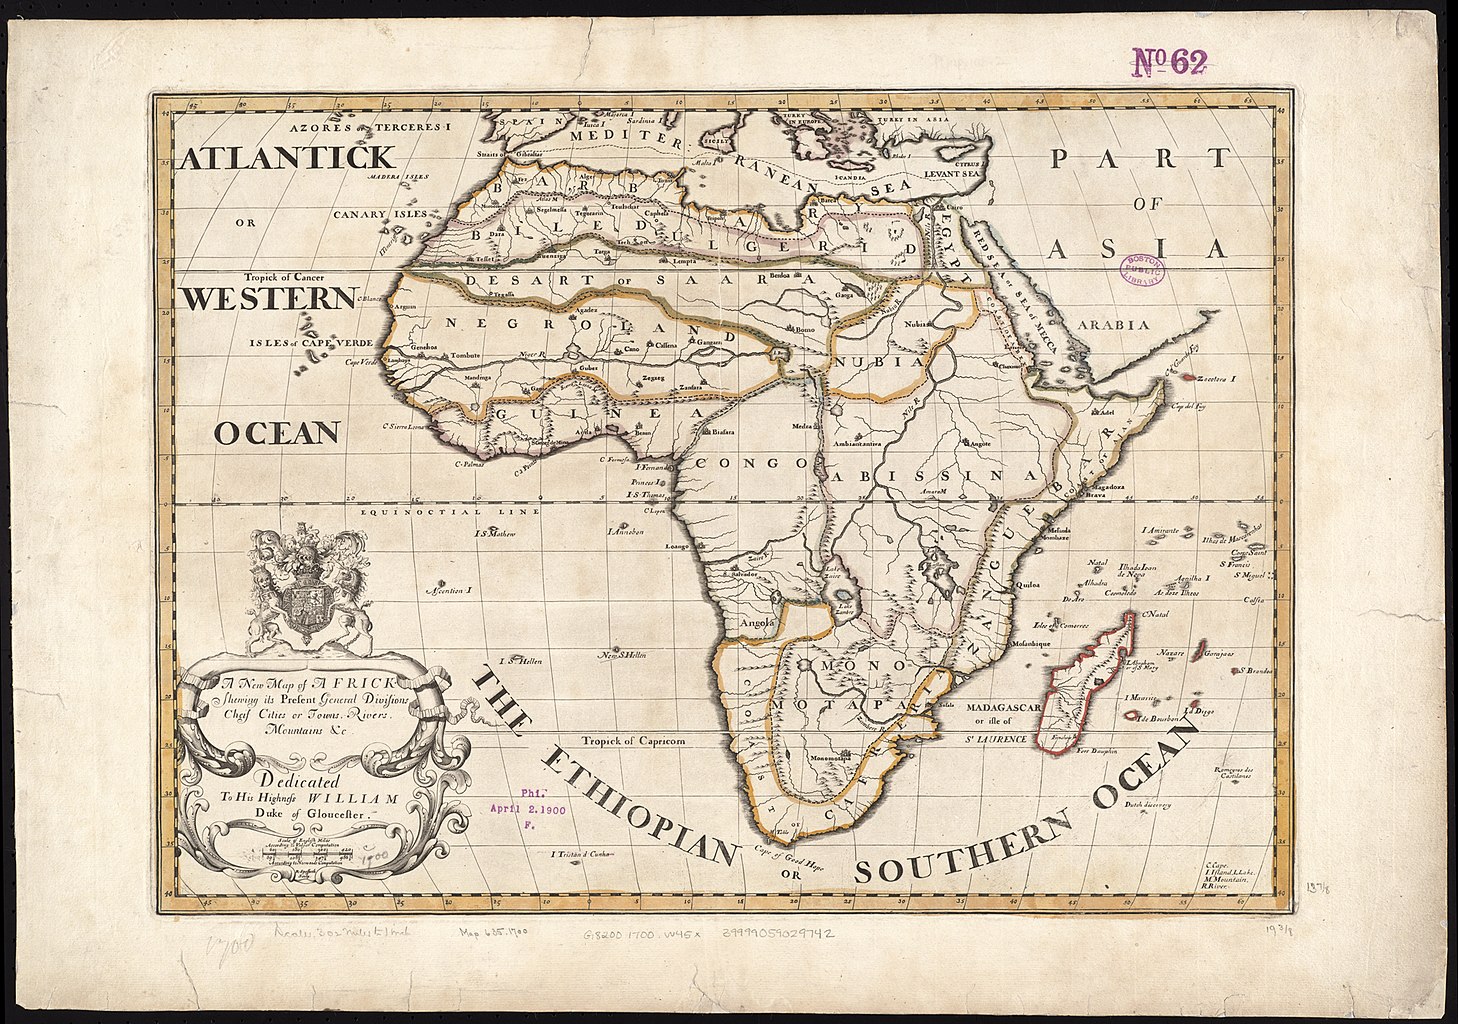 A map from the 1700s detailing Africa, and the language shift between the names of oceans at the time.